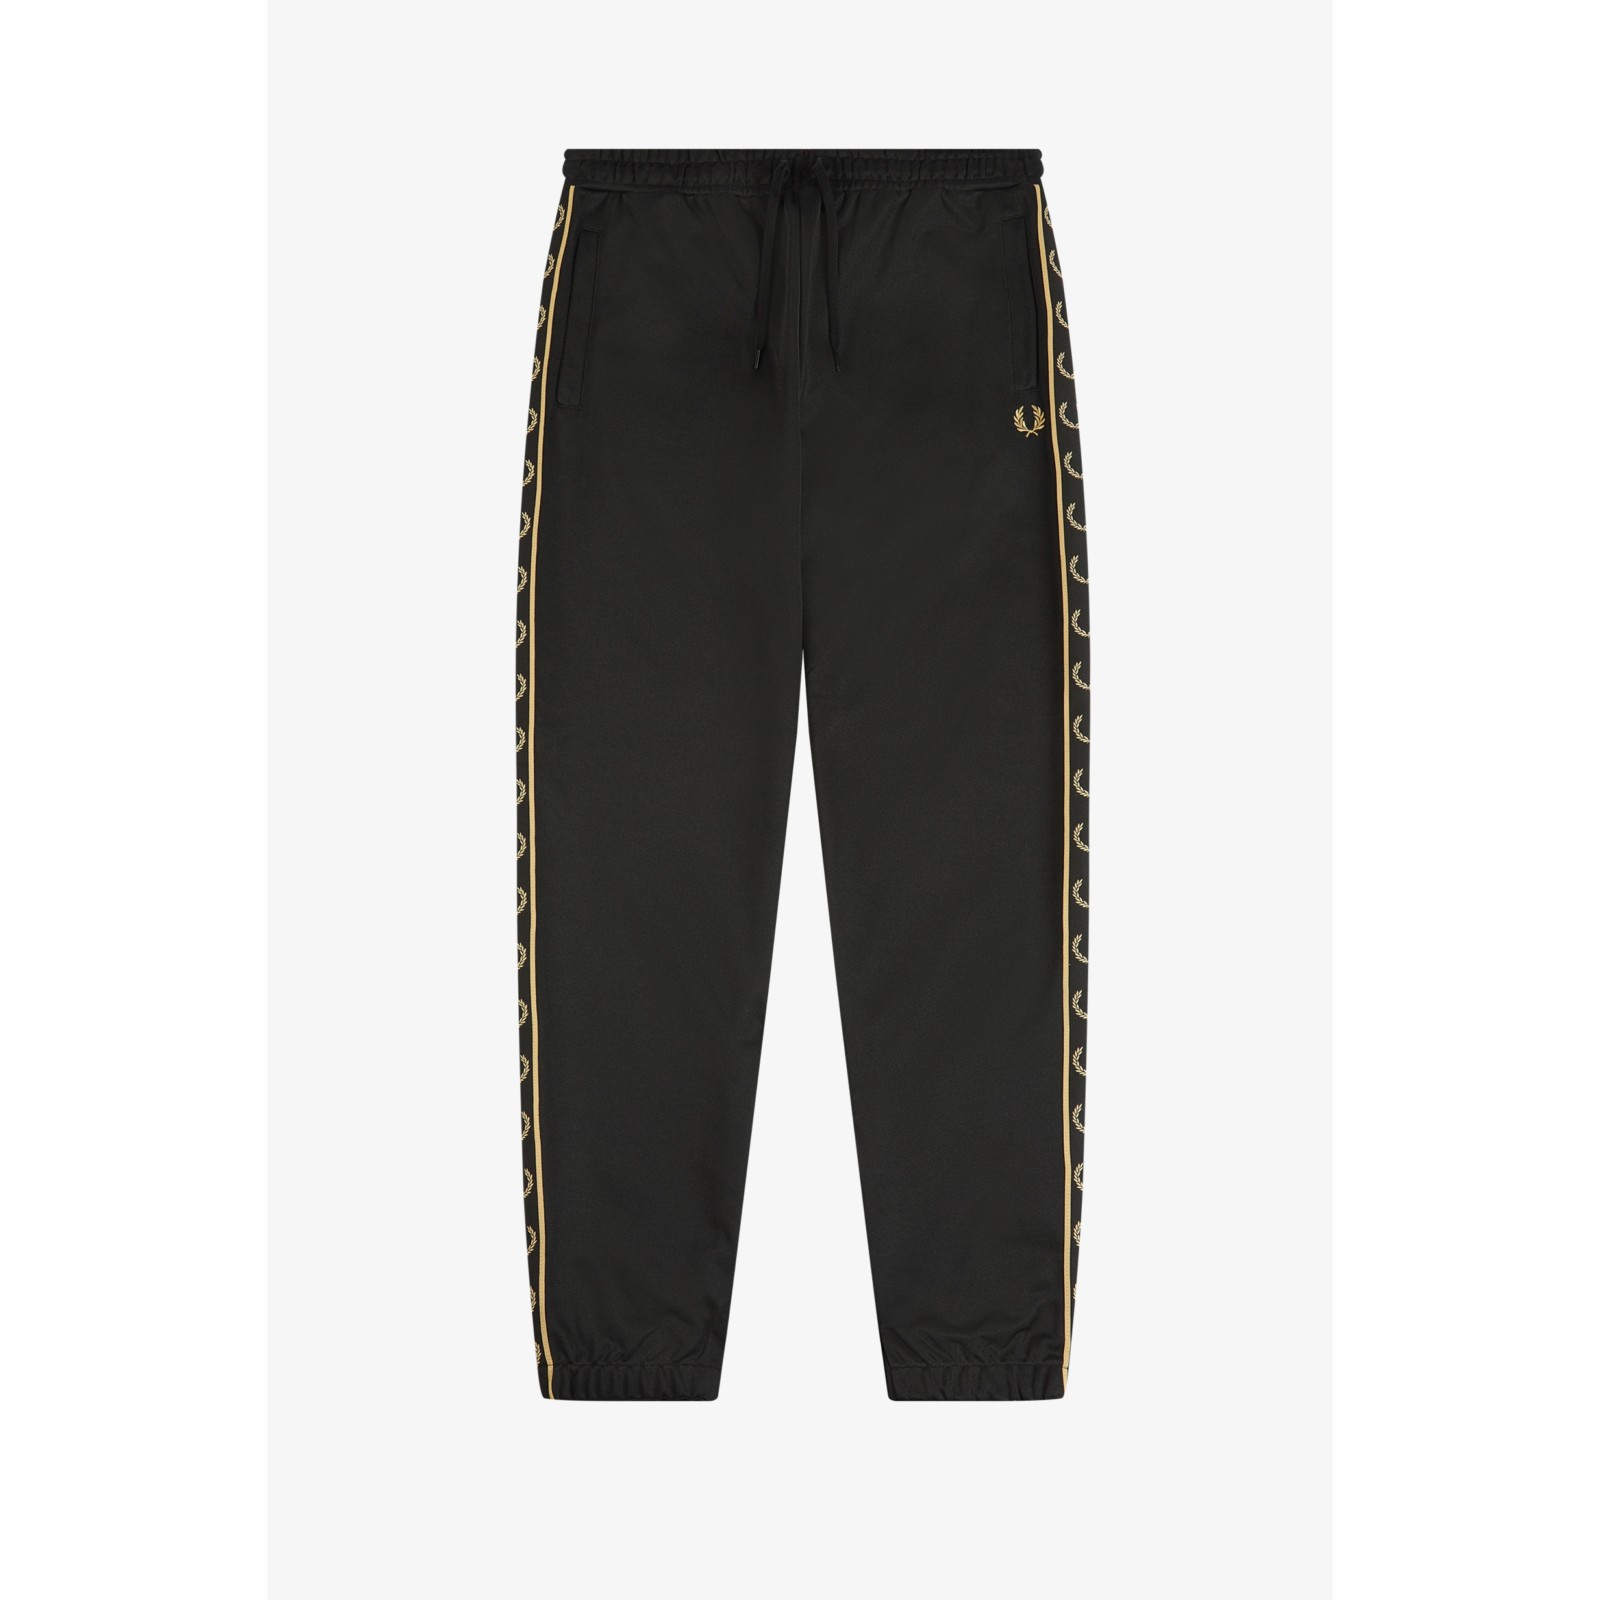 Fred-perry_contrast-tape-track-pant_musta-kulta_T4507_R23